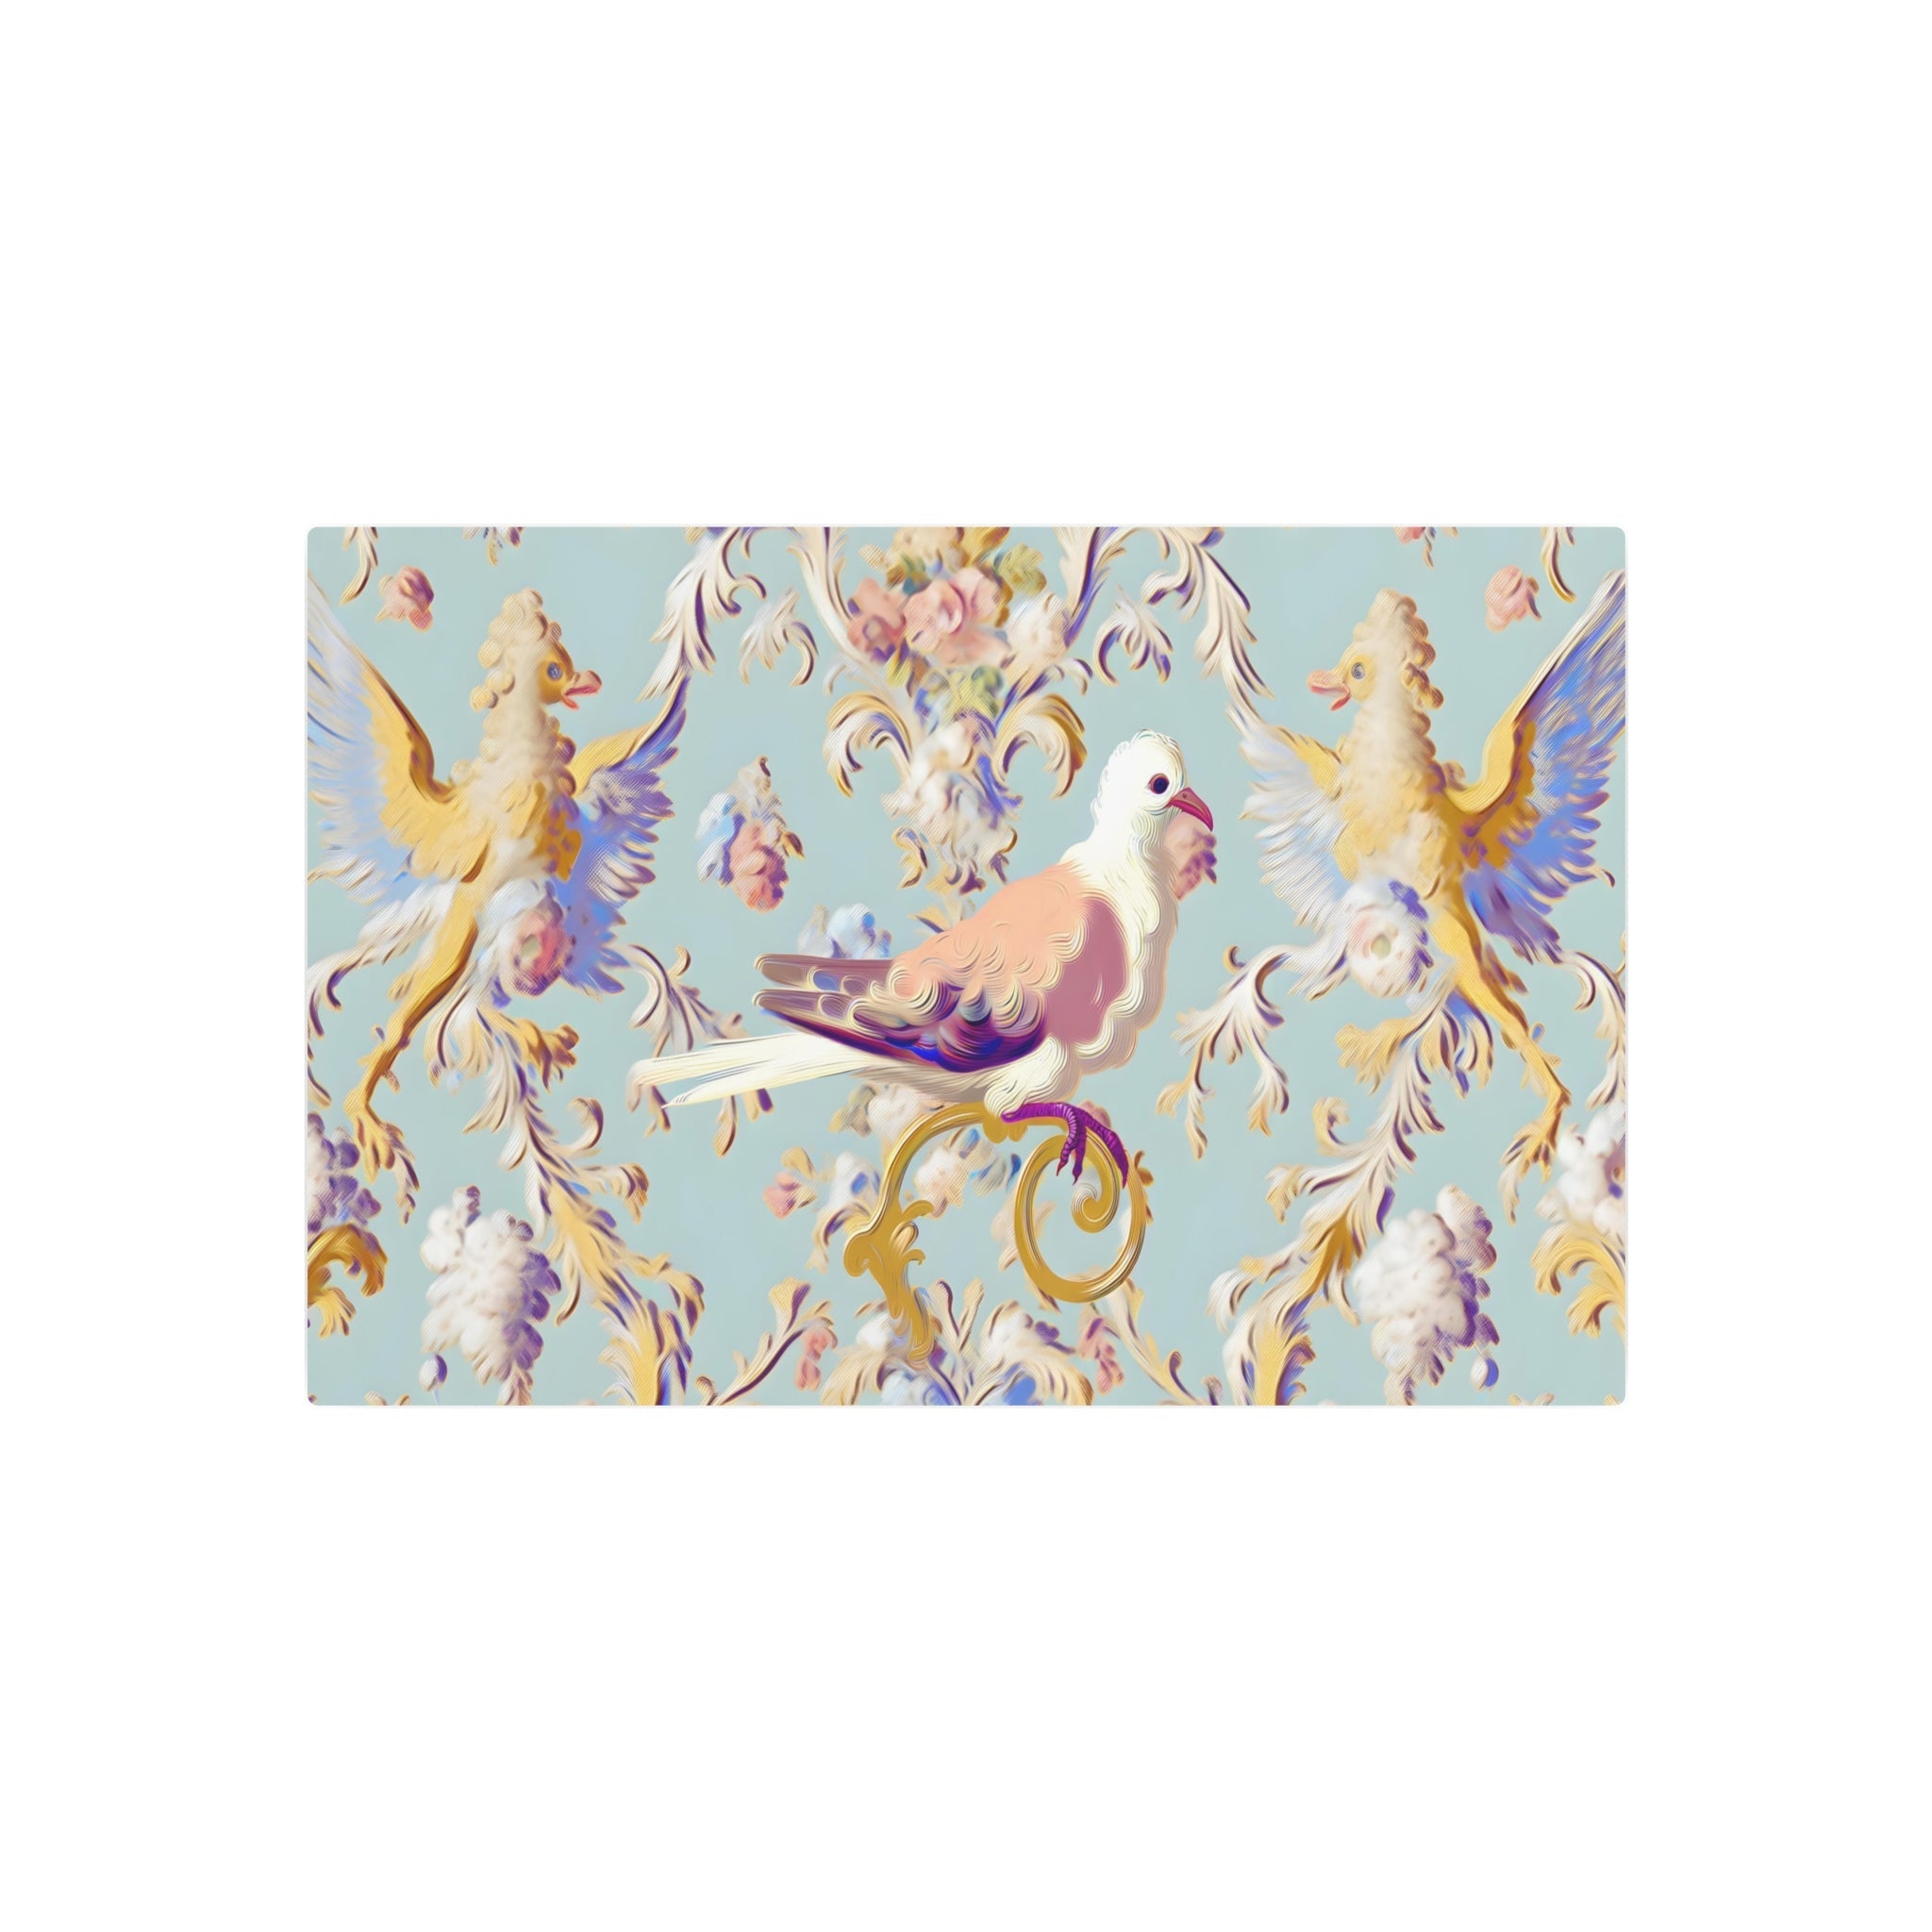 Metal Poster Art | "Pastel Rococo Style Western Art Painting - Intricate Opulent Bird Scene with Playful Ornate Detailing" - Metal Poster Art 30″ x 20″ (Horizontal) 0.12''